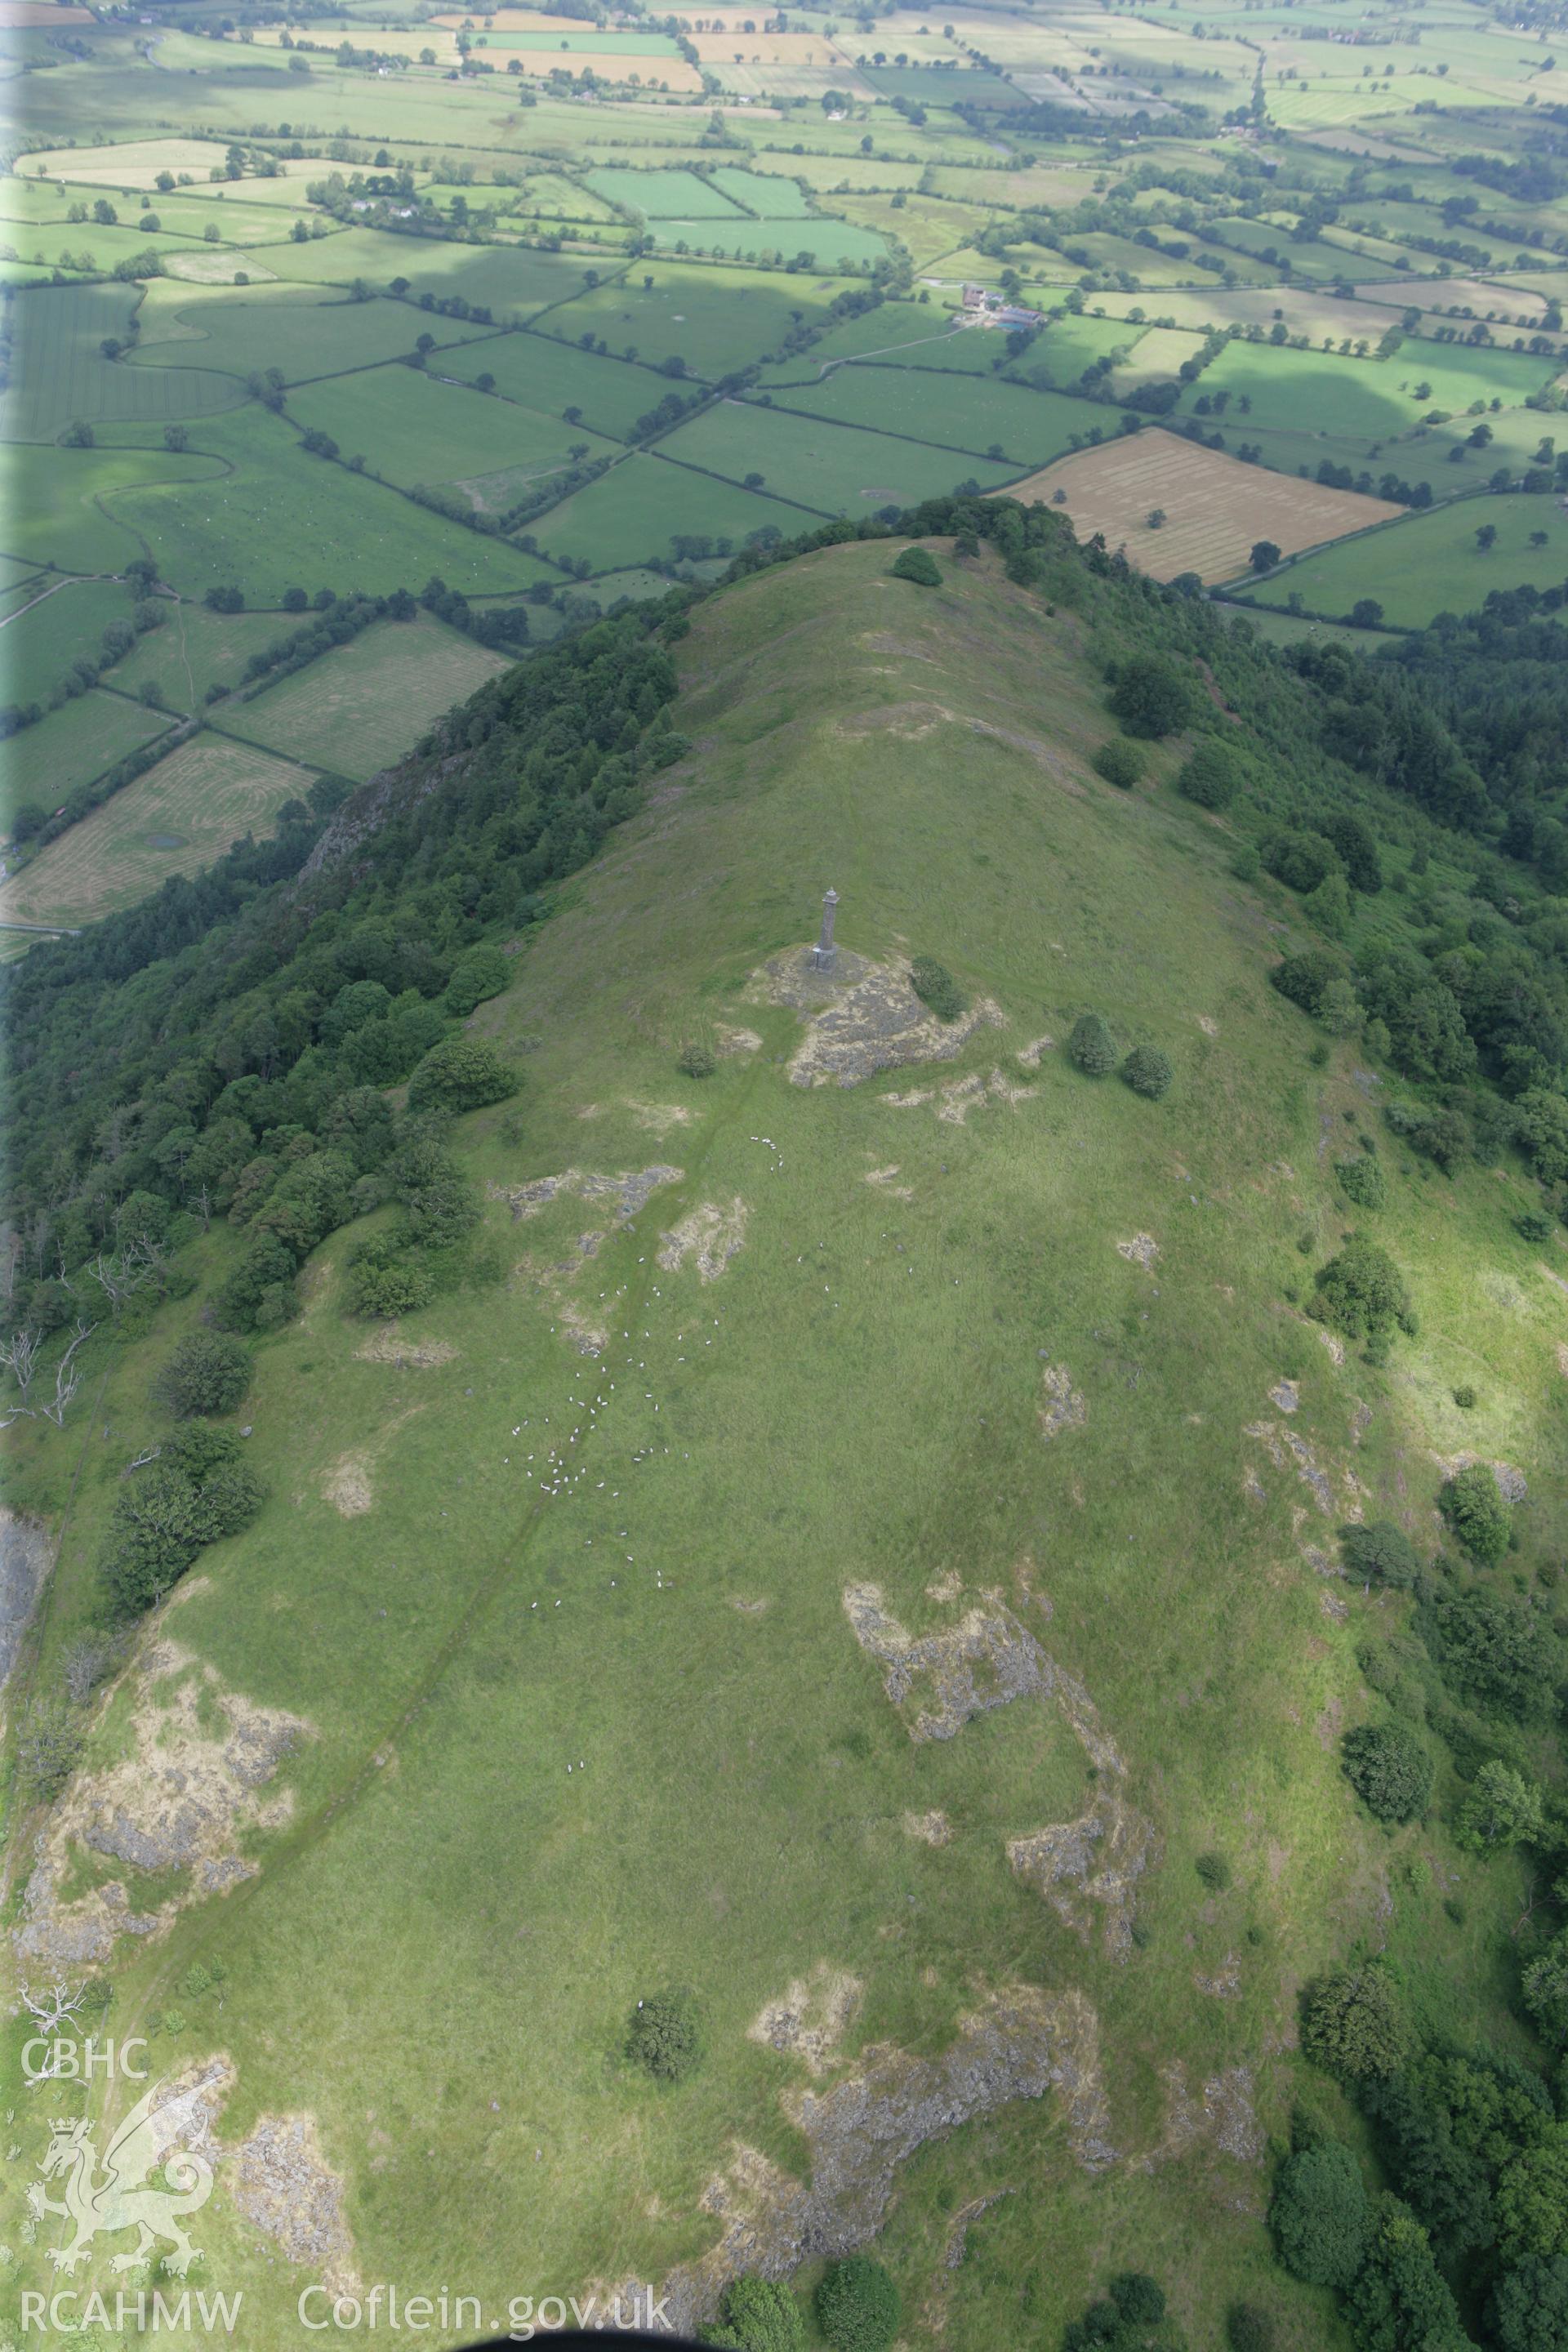 RCAHMW colour oblique photograph of Breddin Hillfort, with Rodney's pillar. Taken by Toby Driver on 01/07/2008.